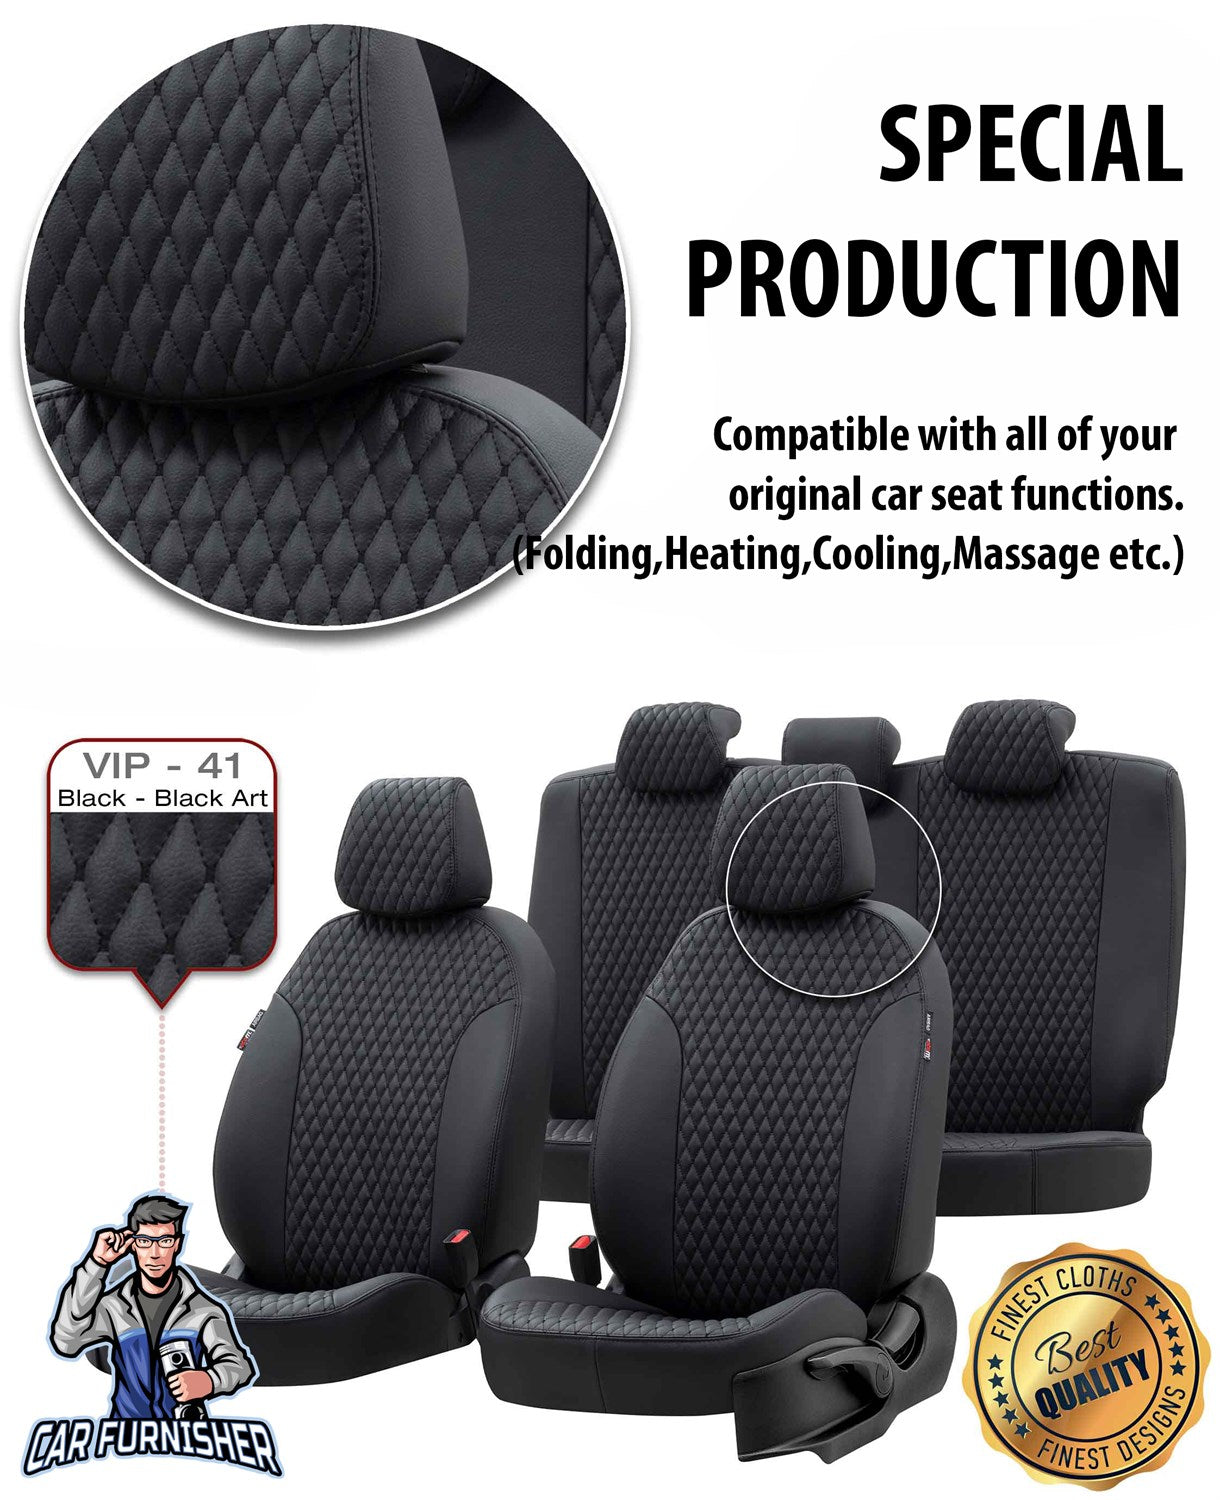 Jeep Renegade Seat Covers Amsterdam Leather Design Dark Gray Leather